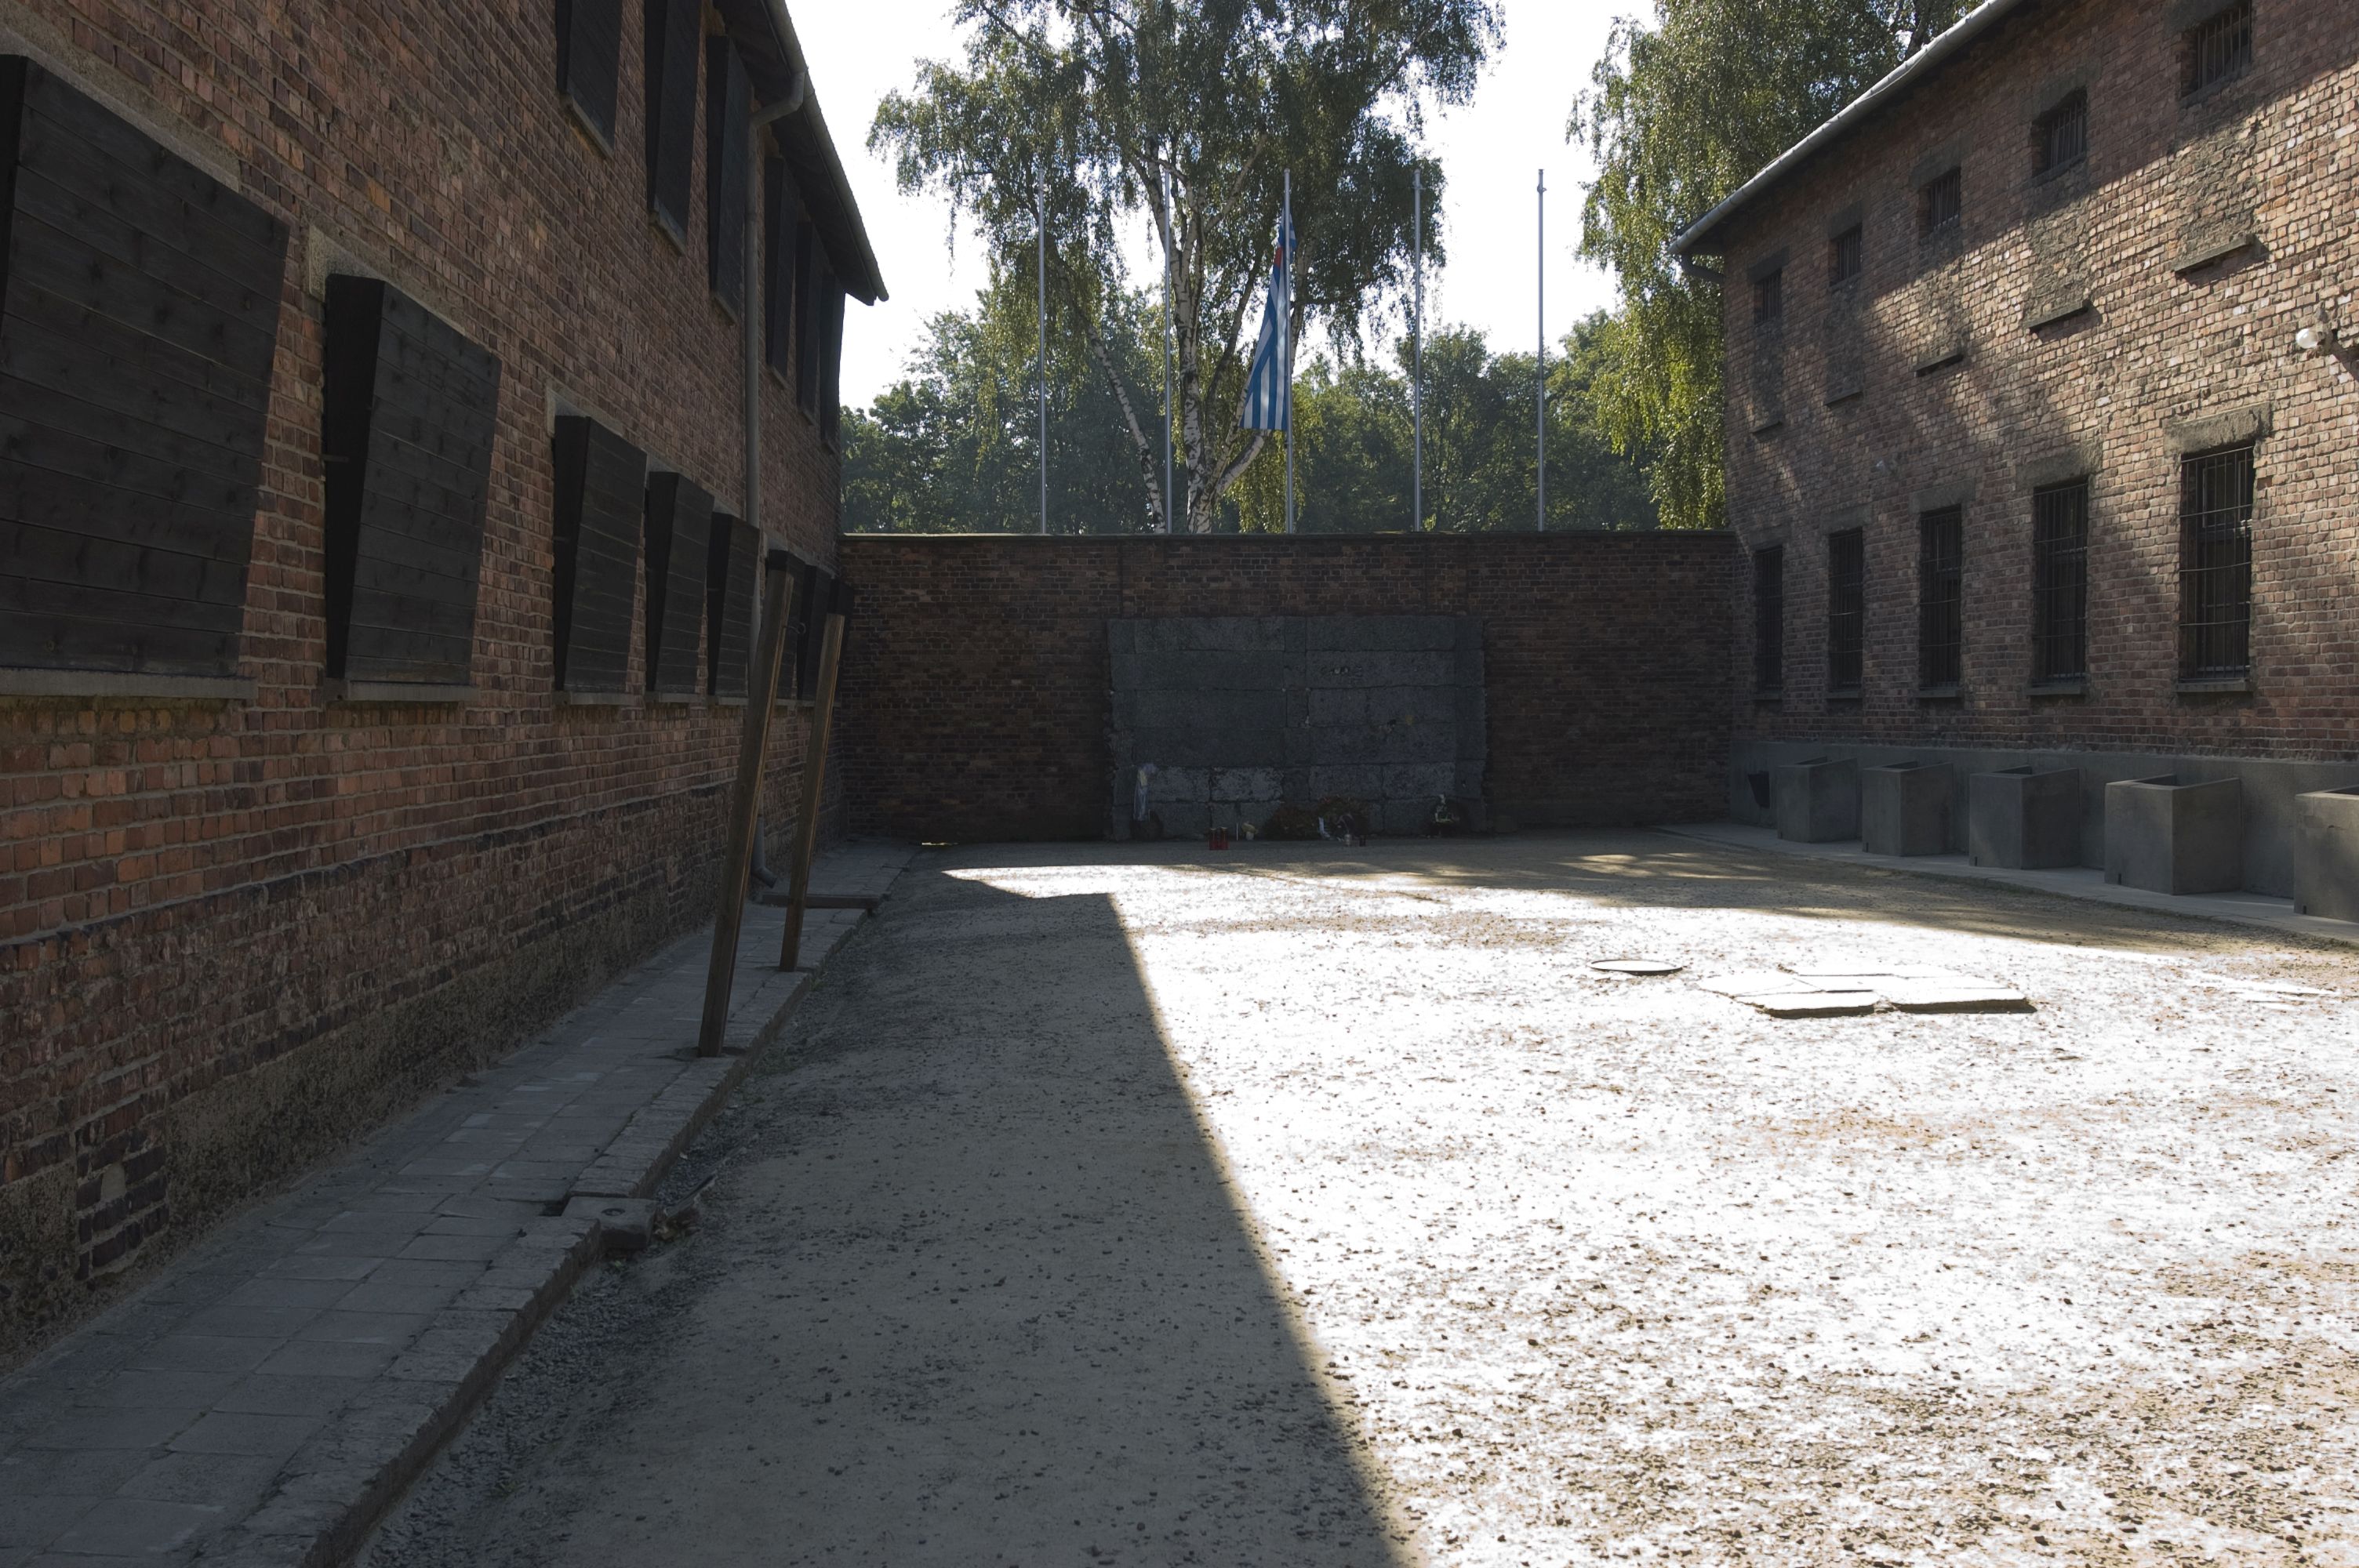 A wall between the two blocks 10 and 11. In front of it, in the courtyard of the blocks, a replica of the wall in front of which the prisoners were murdered. On the left are the shuttered windows of block 10, on the ground stakes are embedded - used for the punishment by the post.